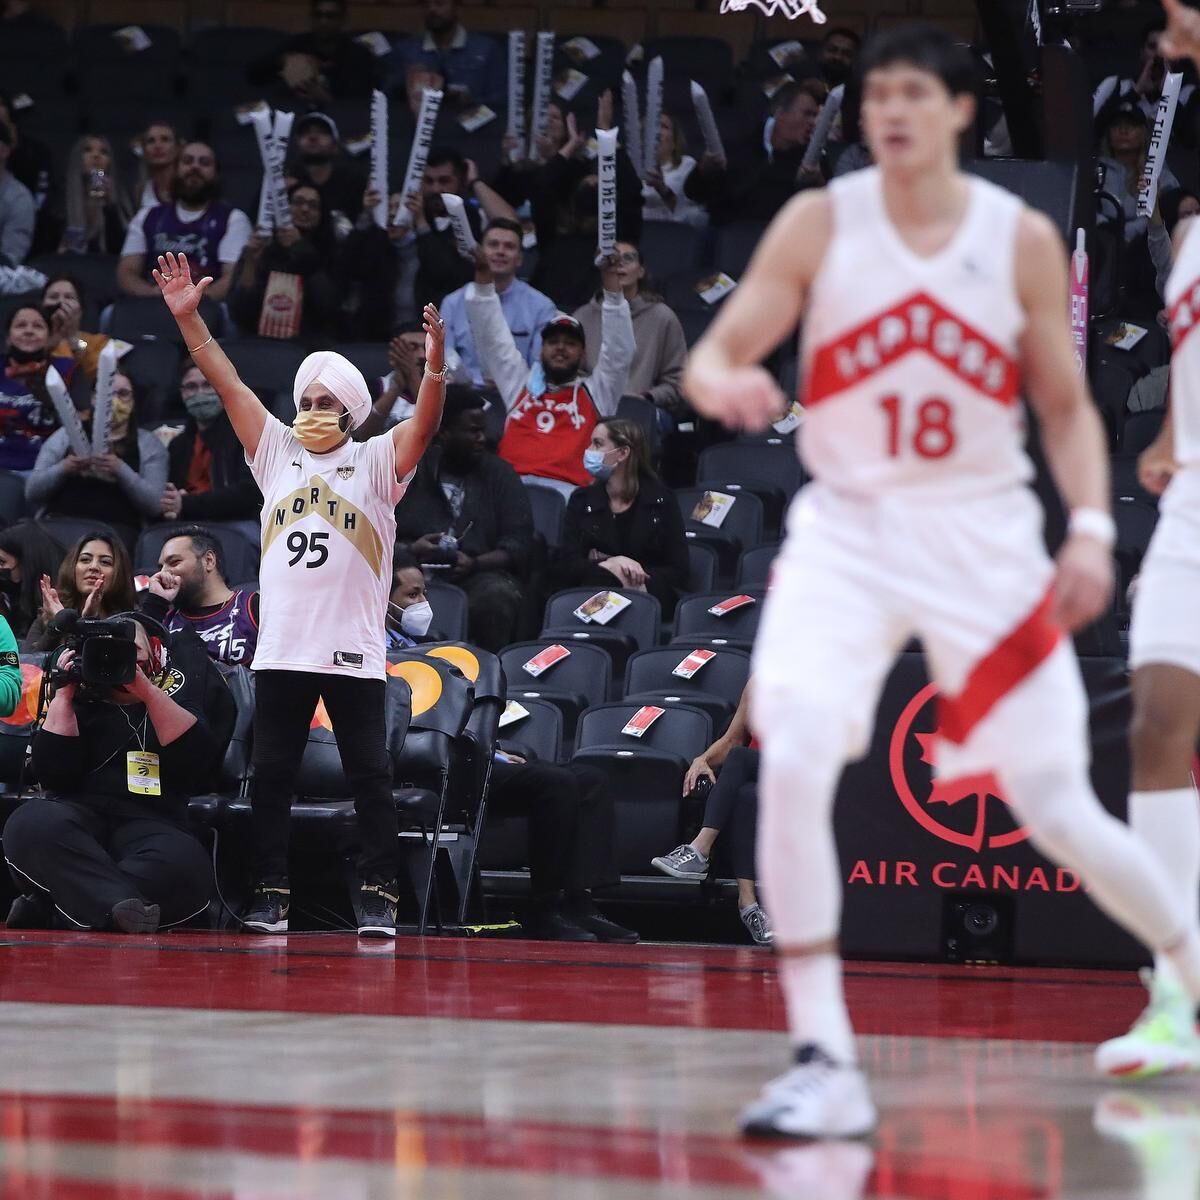 Heres what people are saying about the eye-popping prices for Raptors tickets in Toronto